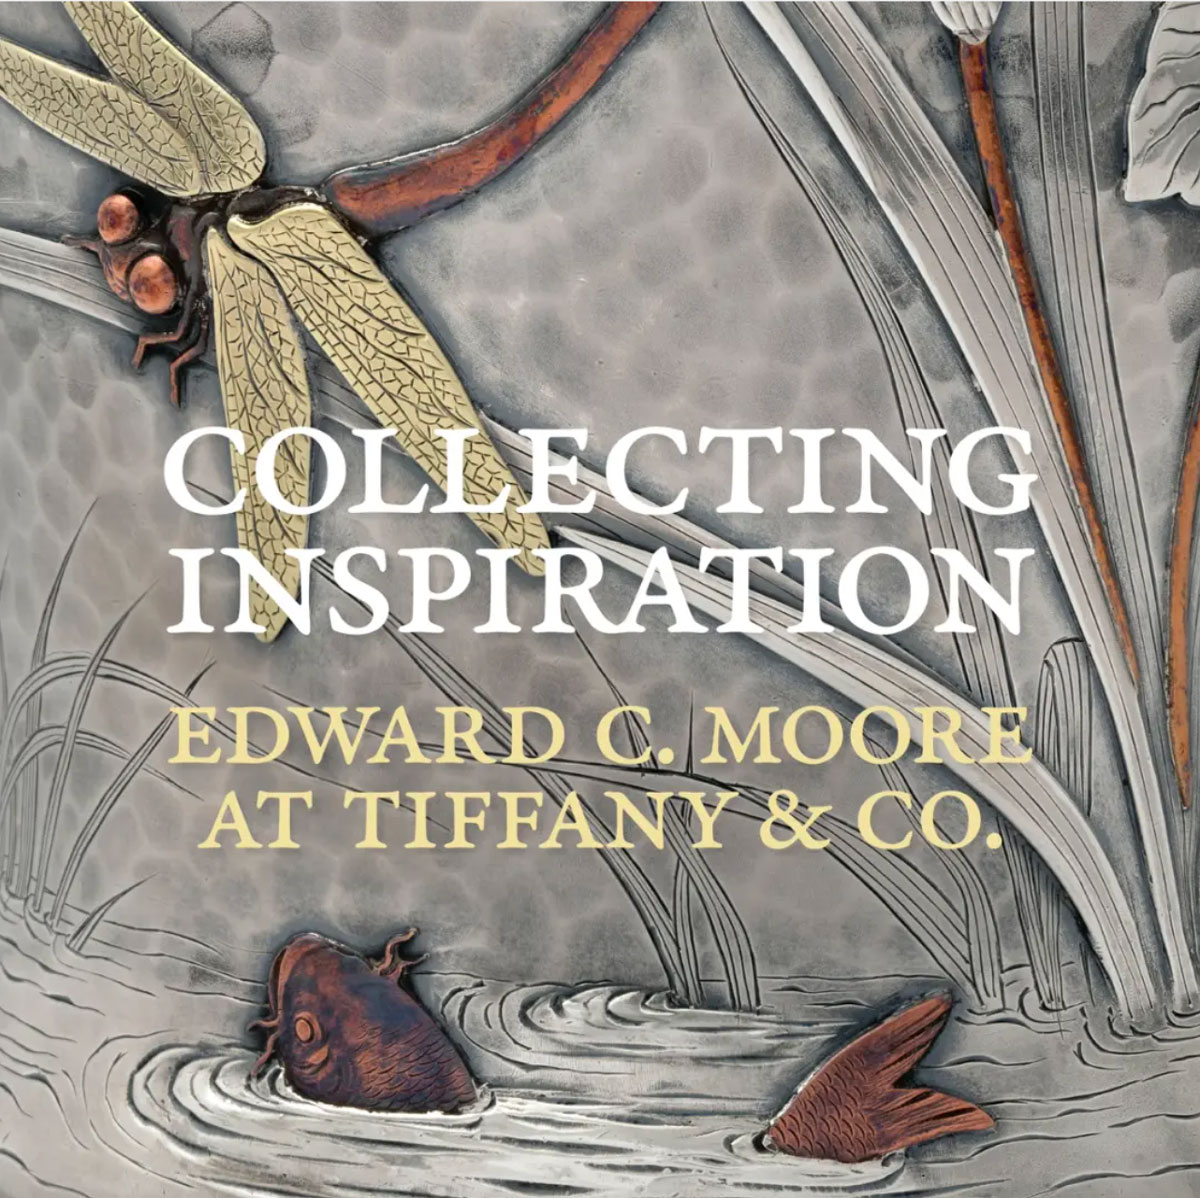 Collecting Inspiration: Edward C. Moore at Tiffany & Co. at The Metropolitan Museum of Art